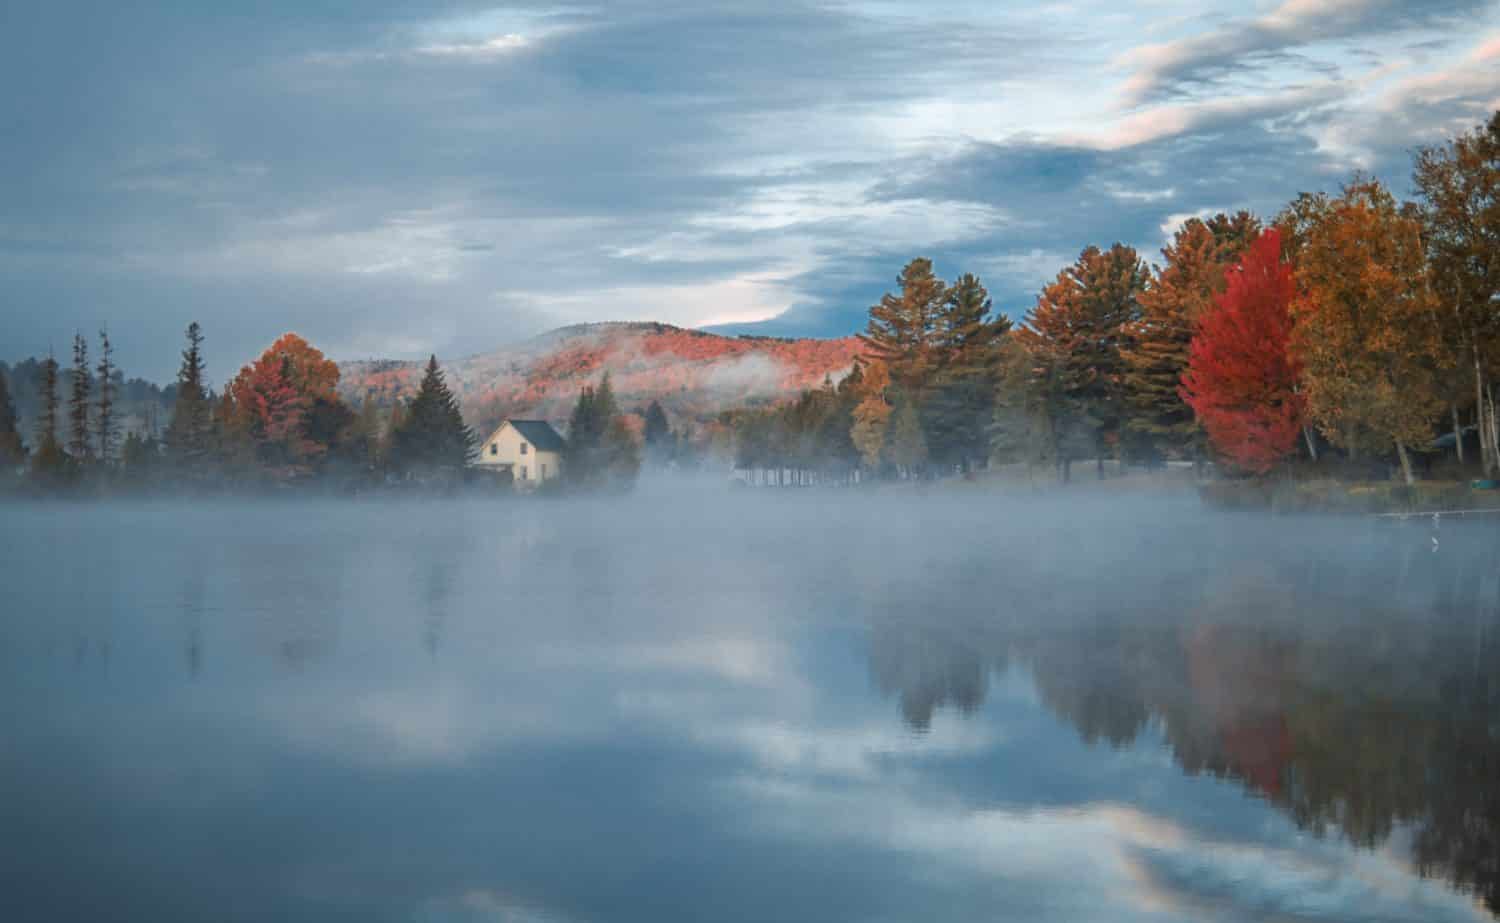 Early morning on Joe's Pond in Vermont